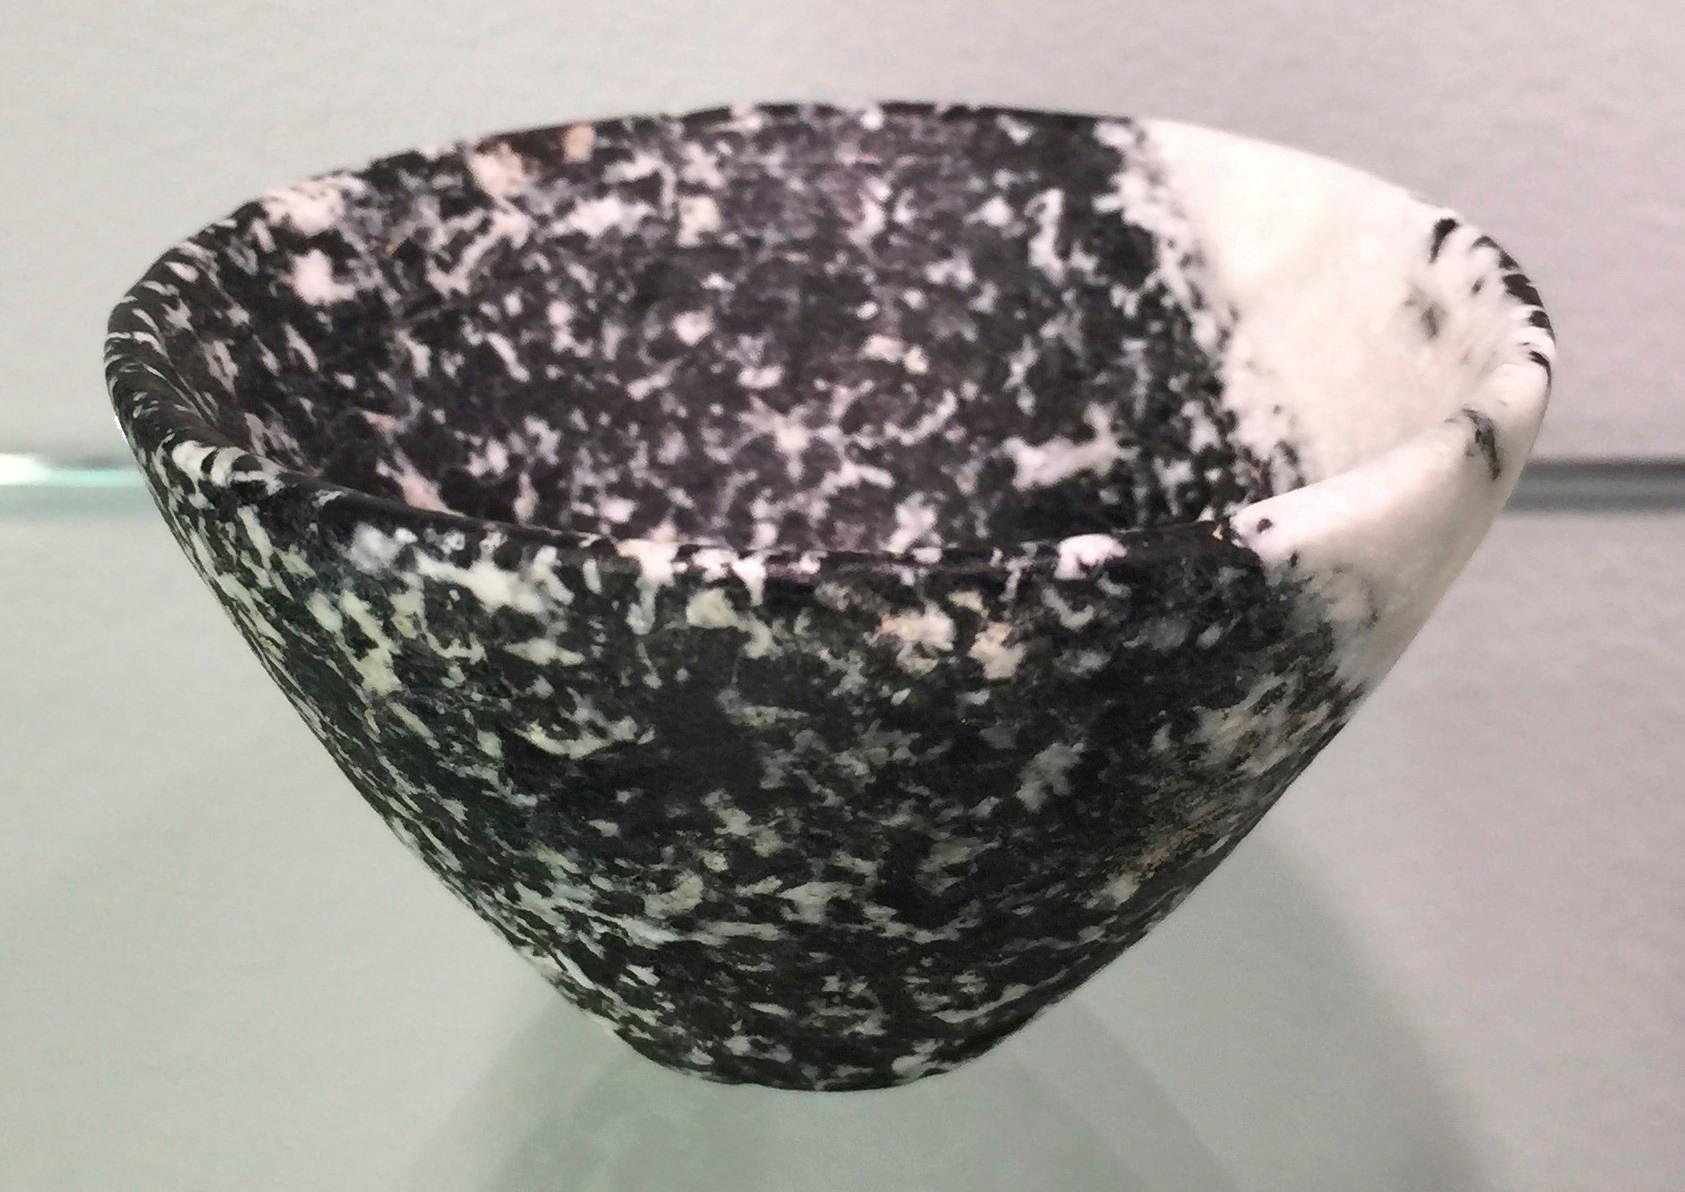 This Assyrian bichrome masterpiece dating 3rd millennium BC is a small bichrome stone vessel of extremely thin walled very dark green, almost black, and white speckled diorite. Fabulous preservation condition. Intact. A true museum quality